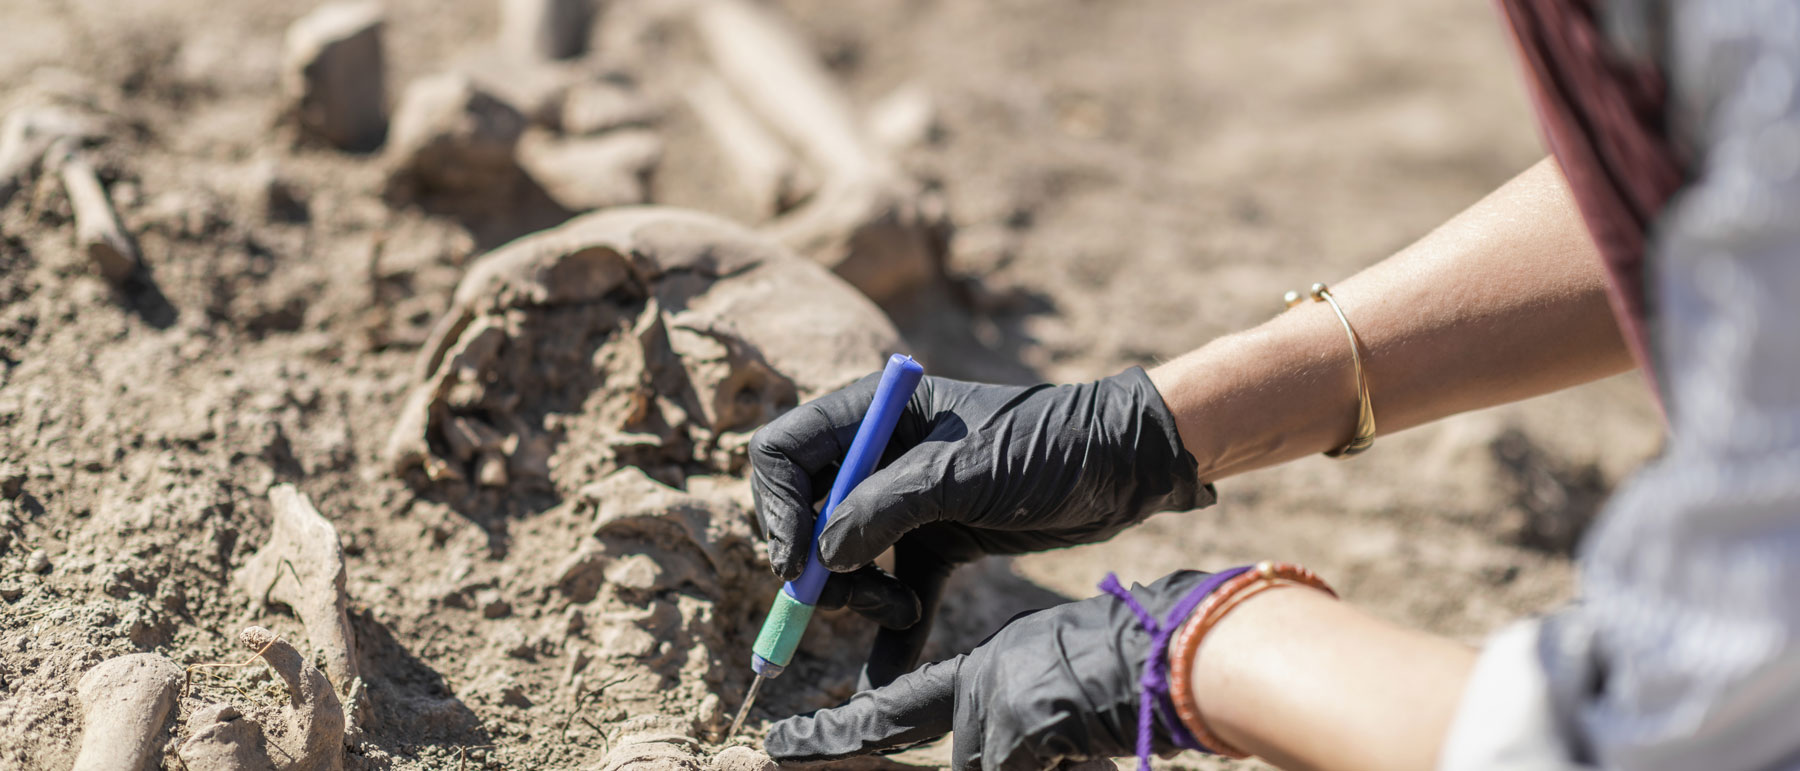 an archaeologist digging in the dirt on an excavation site